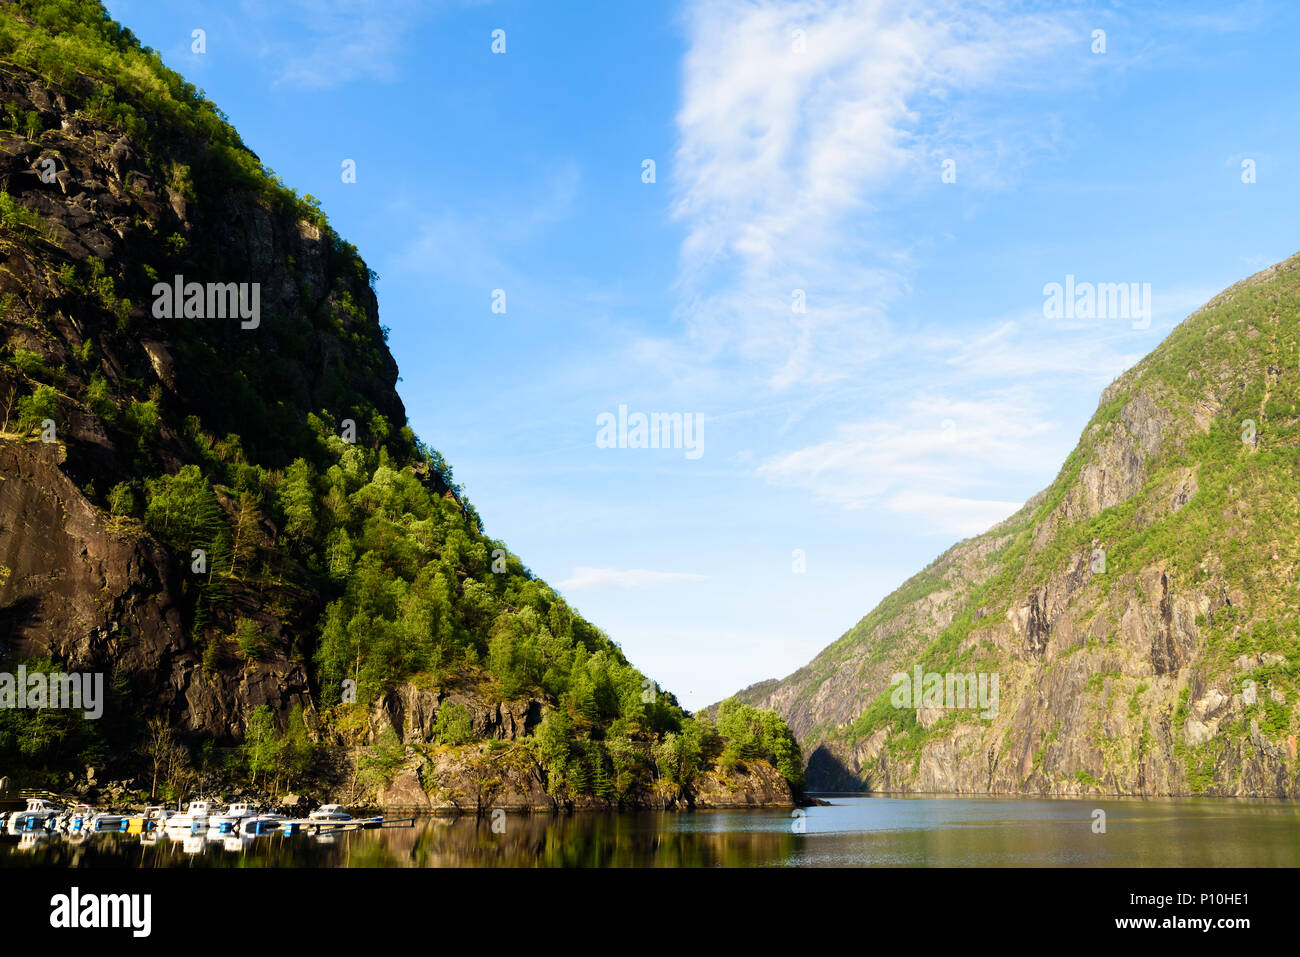 The fjord Akrafjorden on a sunny morning. High mountains on both sides and a marina just below a steep cliff. Location Fjaera in Hordaland, Norway. Stock Photo